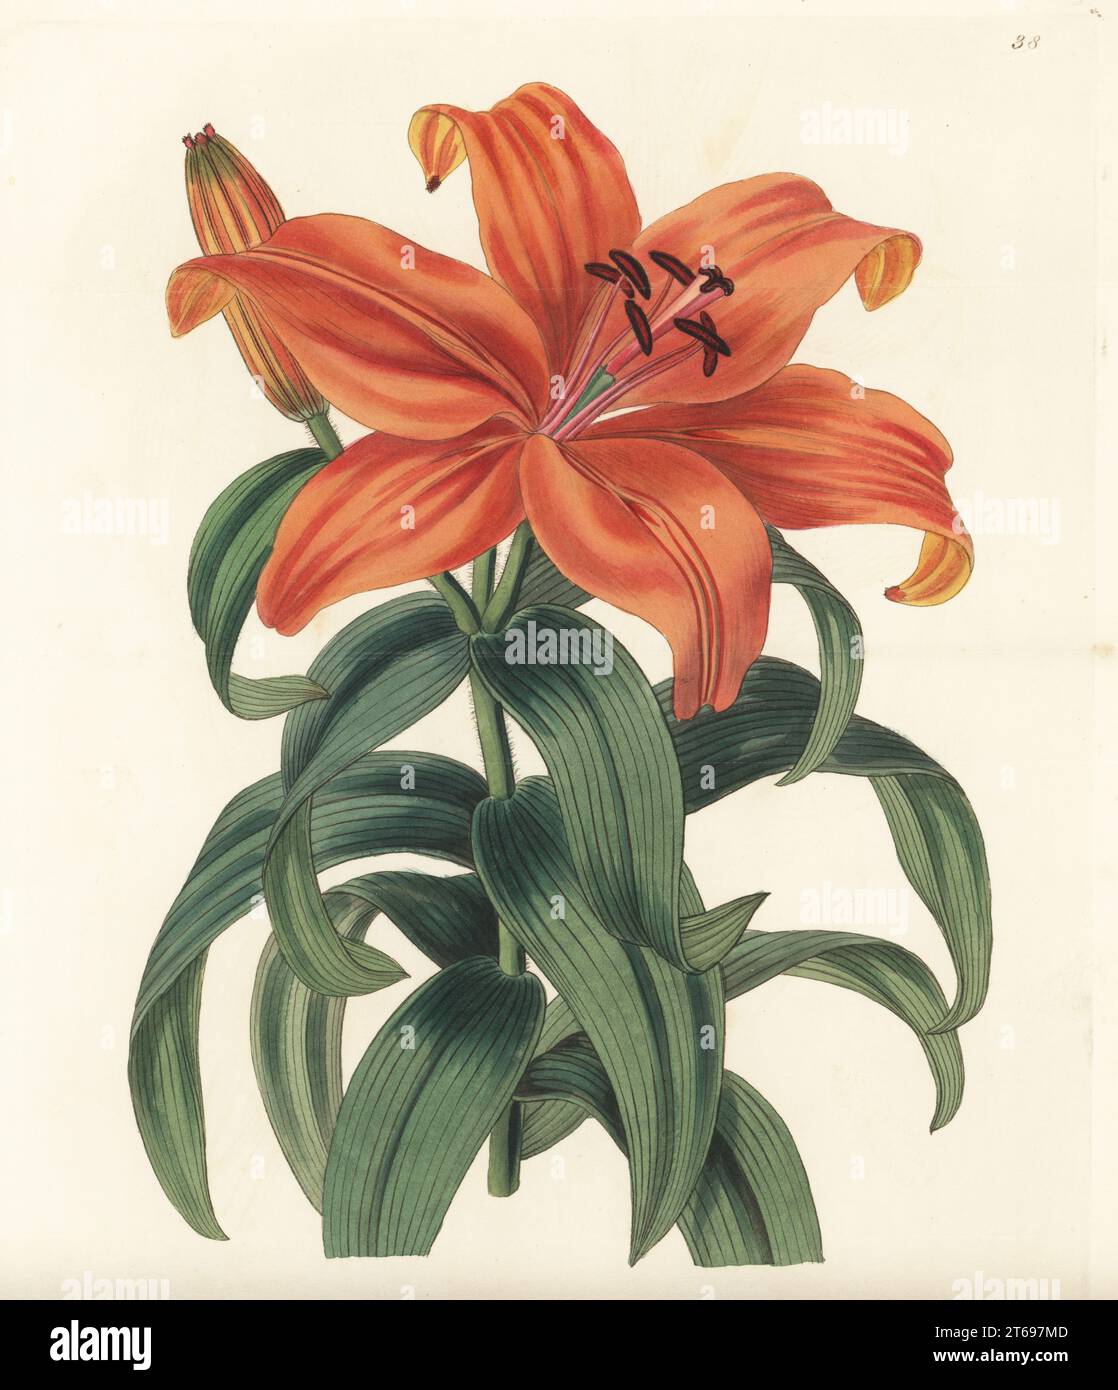 Japanese lily or sukashi yuri, Lilium maculatum var. maculatum. Thunberg's orange lily, Lilium thunbergianum. Native to Japan, introduced to Europe by German botanist Philipp Franz von Siebold. Handcoloured copperplate engraving by George Barclay after a botanical illustration by Sarah Drake from Edwards Botanical Register, edited by John Lindley, published by James Ridgway, London, 1839. Stock Photo